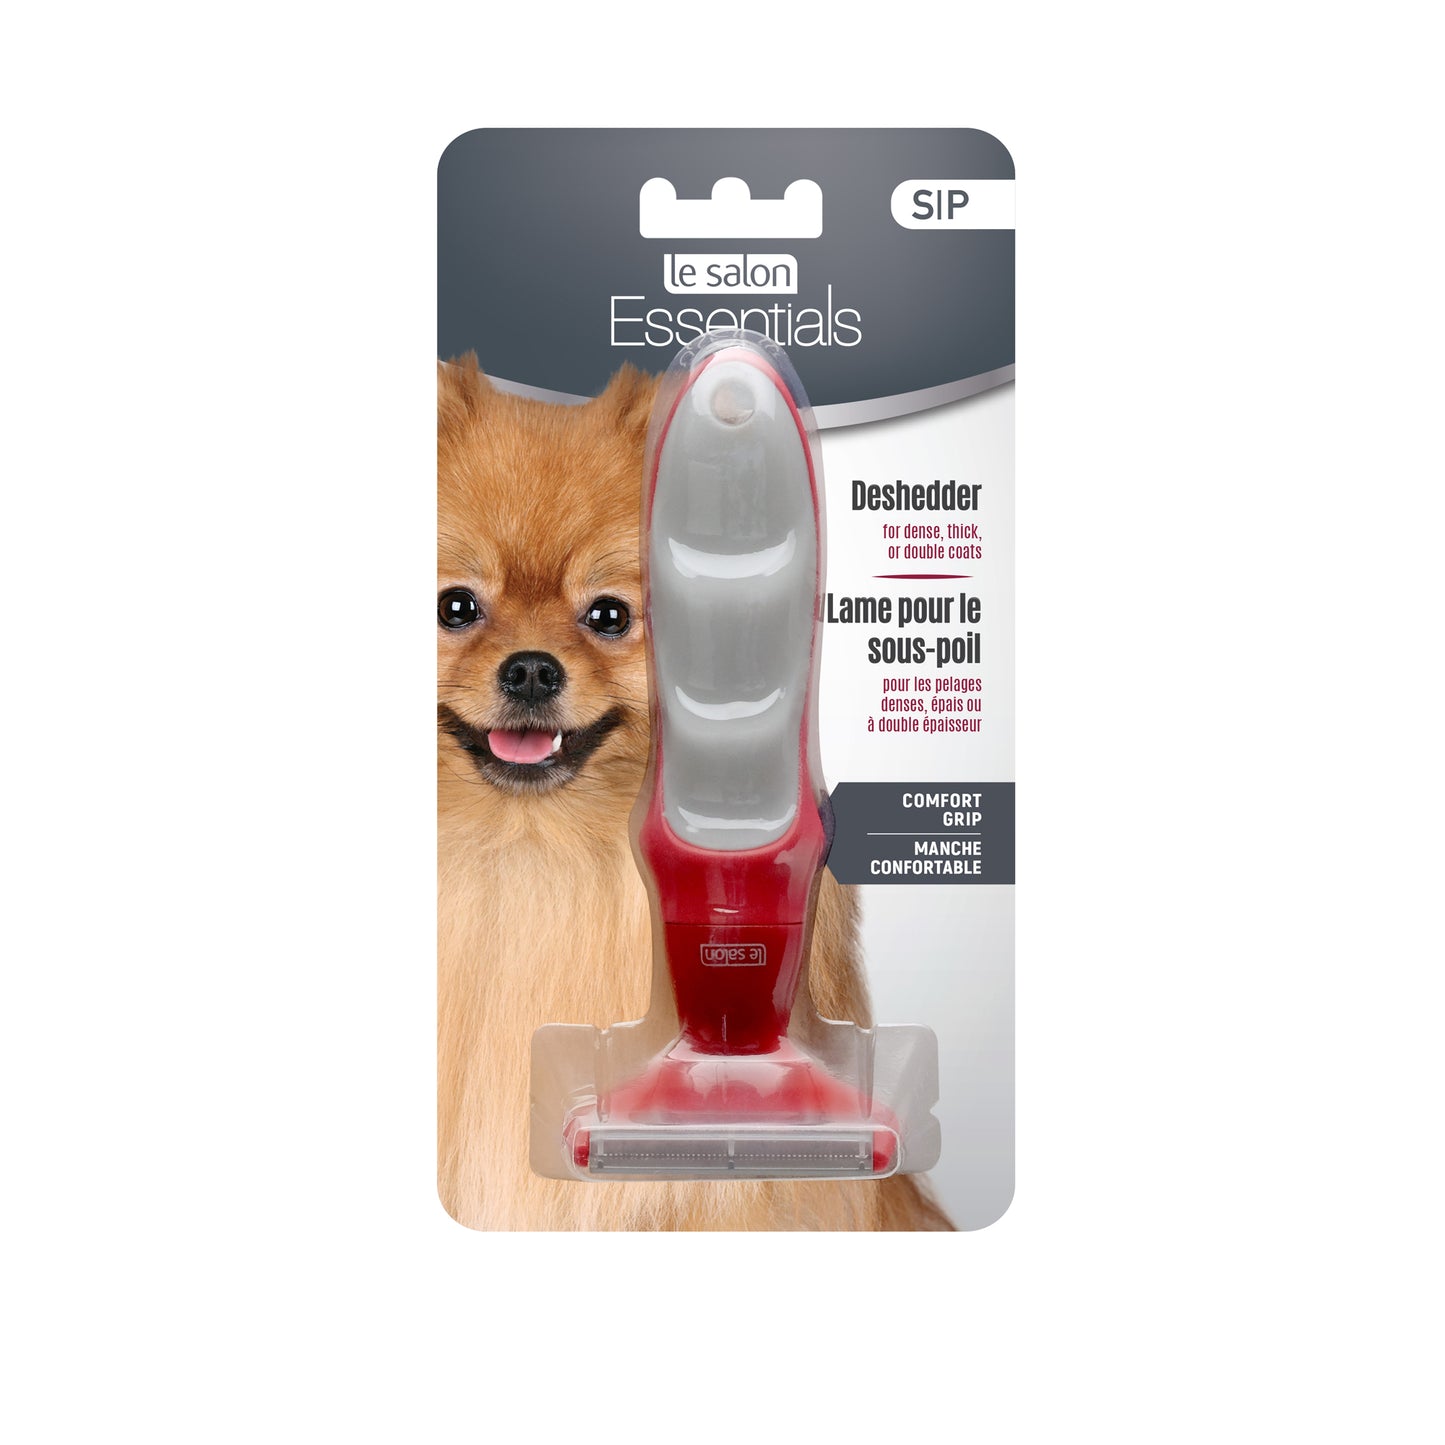 Le Salon Essentials Deshedder For Dogs Small Grooming Small | PetMax Canada